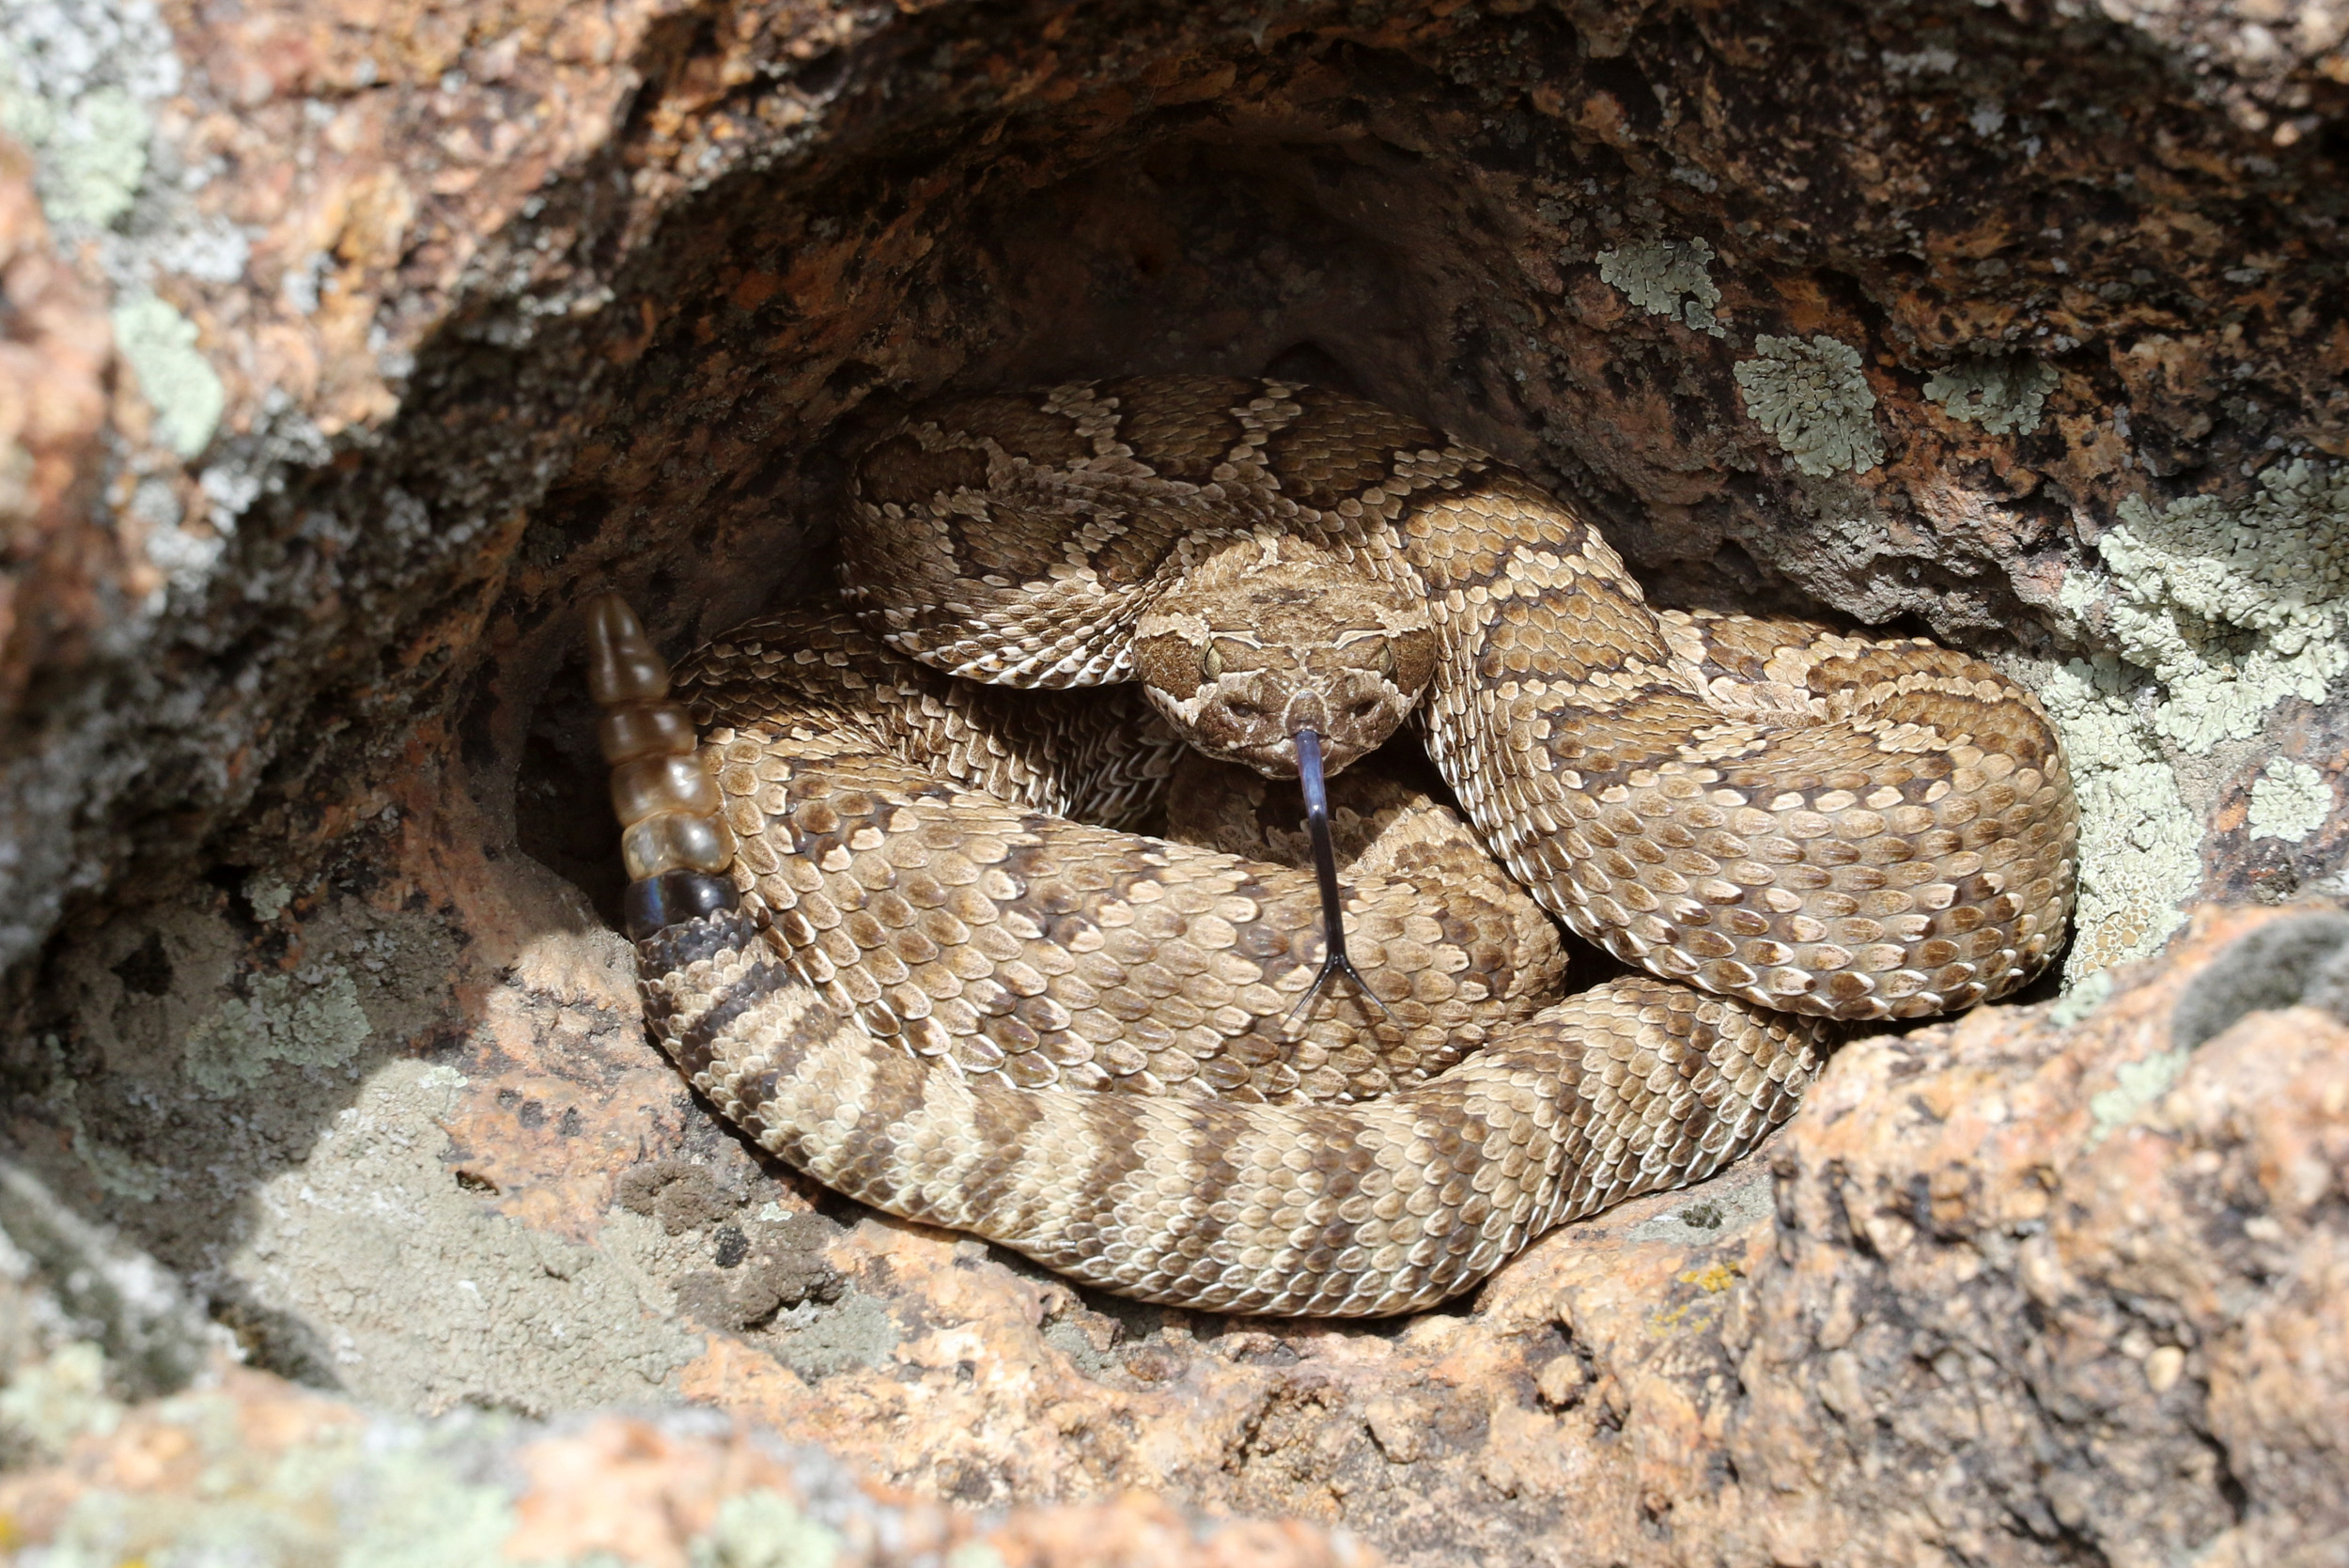 Great Basin rattlesnake generally want to be left alone, they normally rattle to provide a warning. Give them space to get away and they will leave you alone.